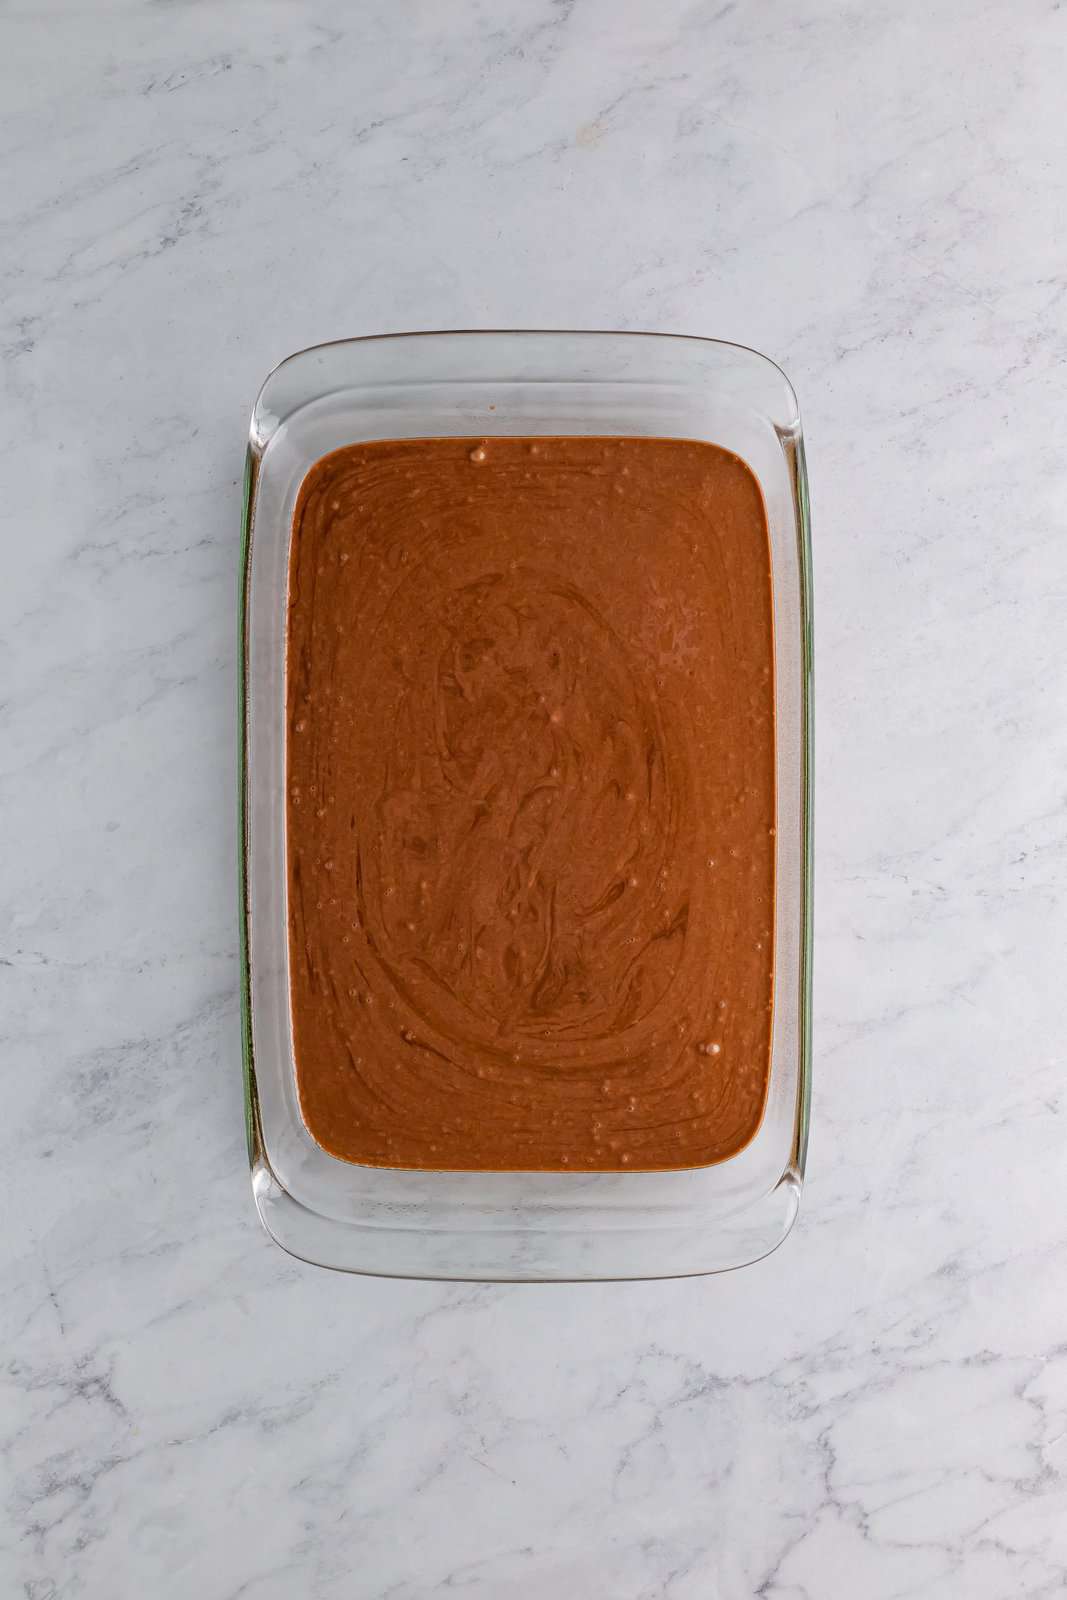 Chocolate cake batter in a baking dish.